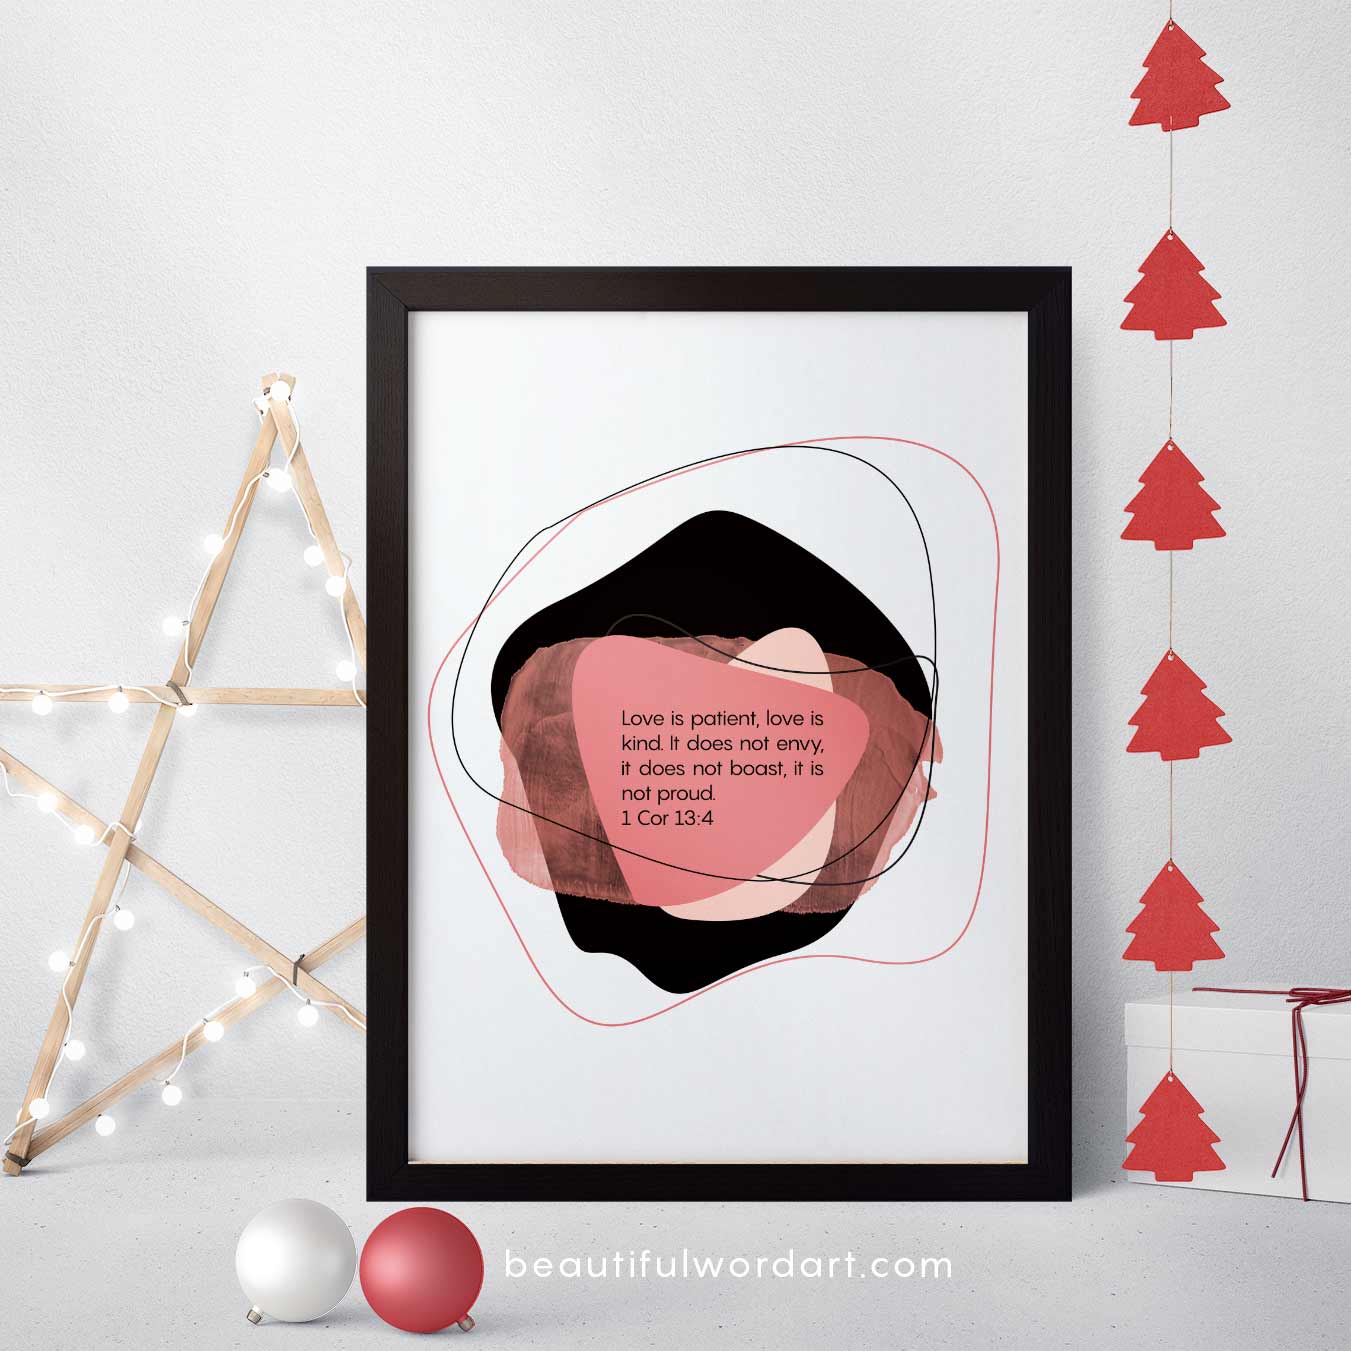 Inspirational Wall Art and Christmas decorations red and white 